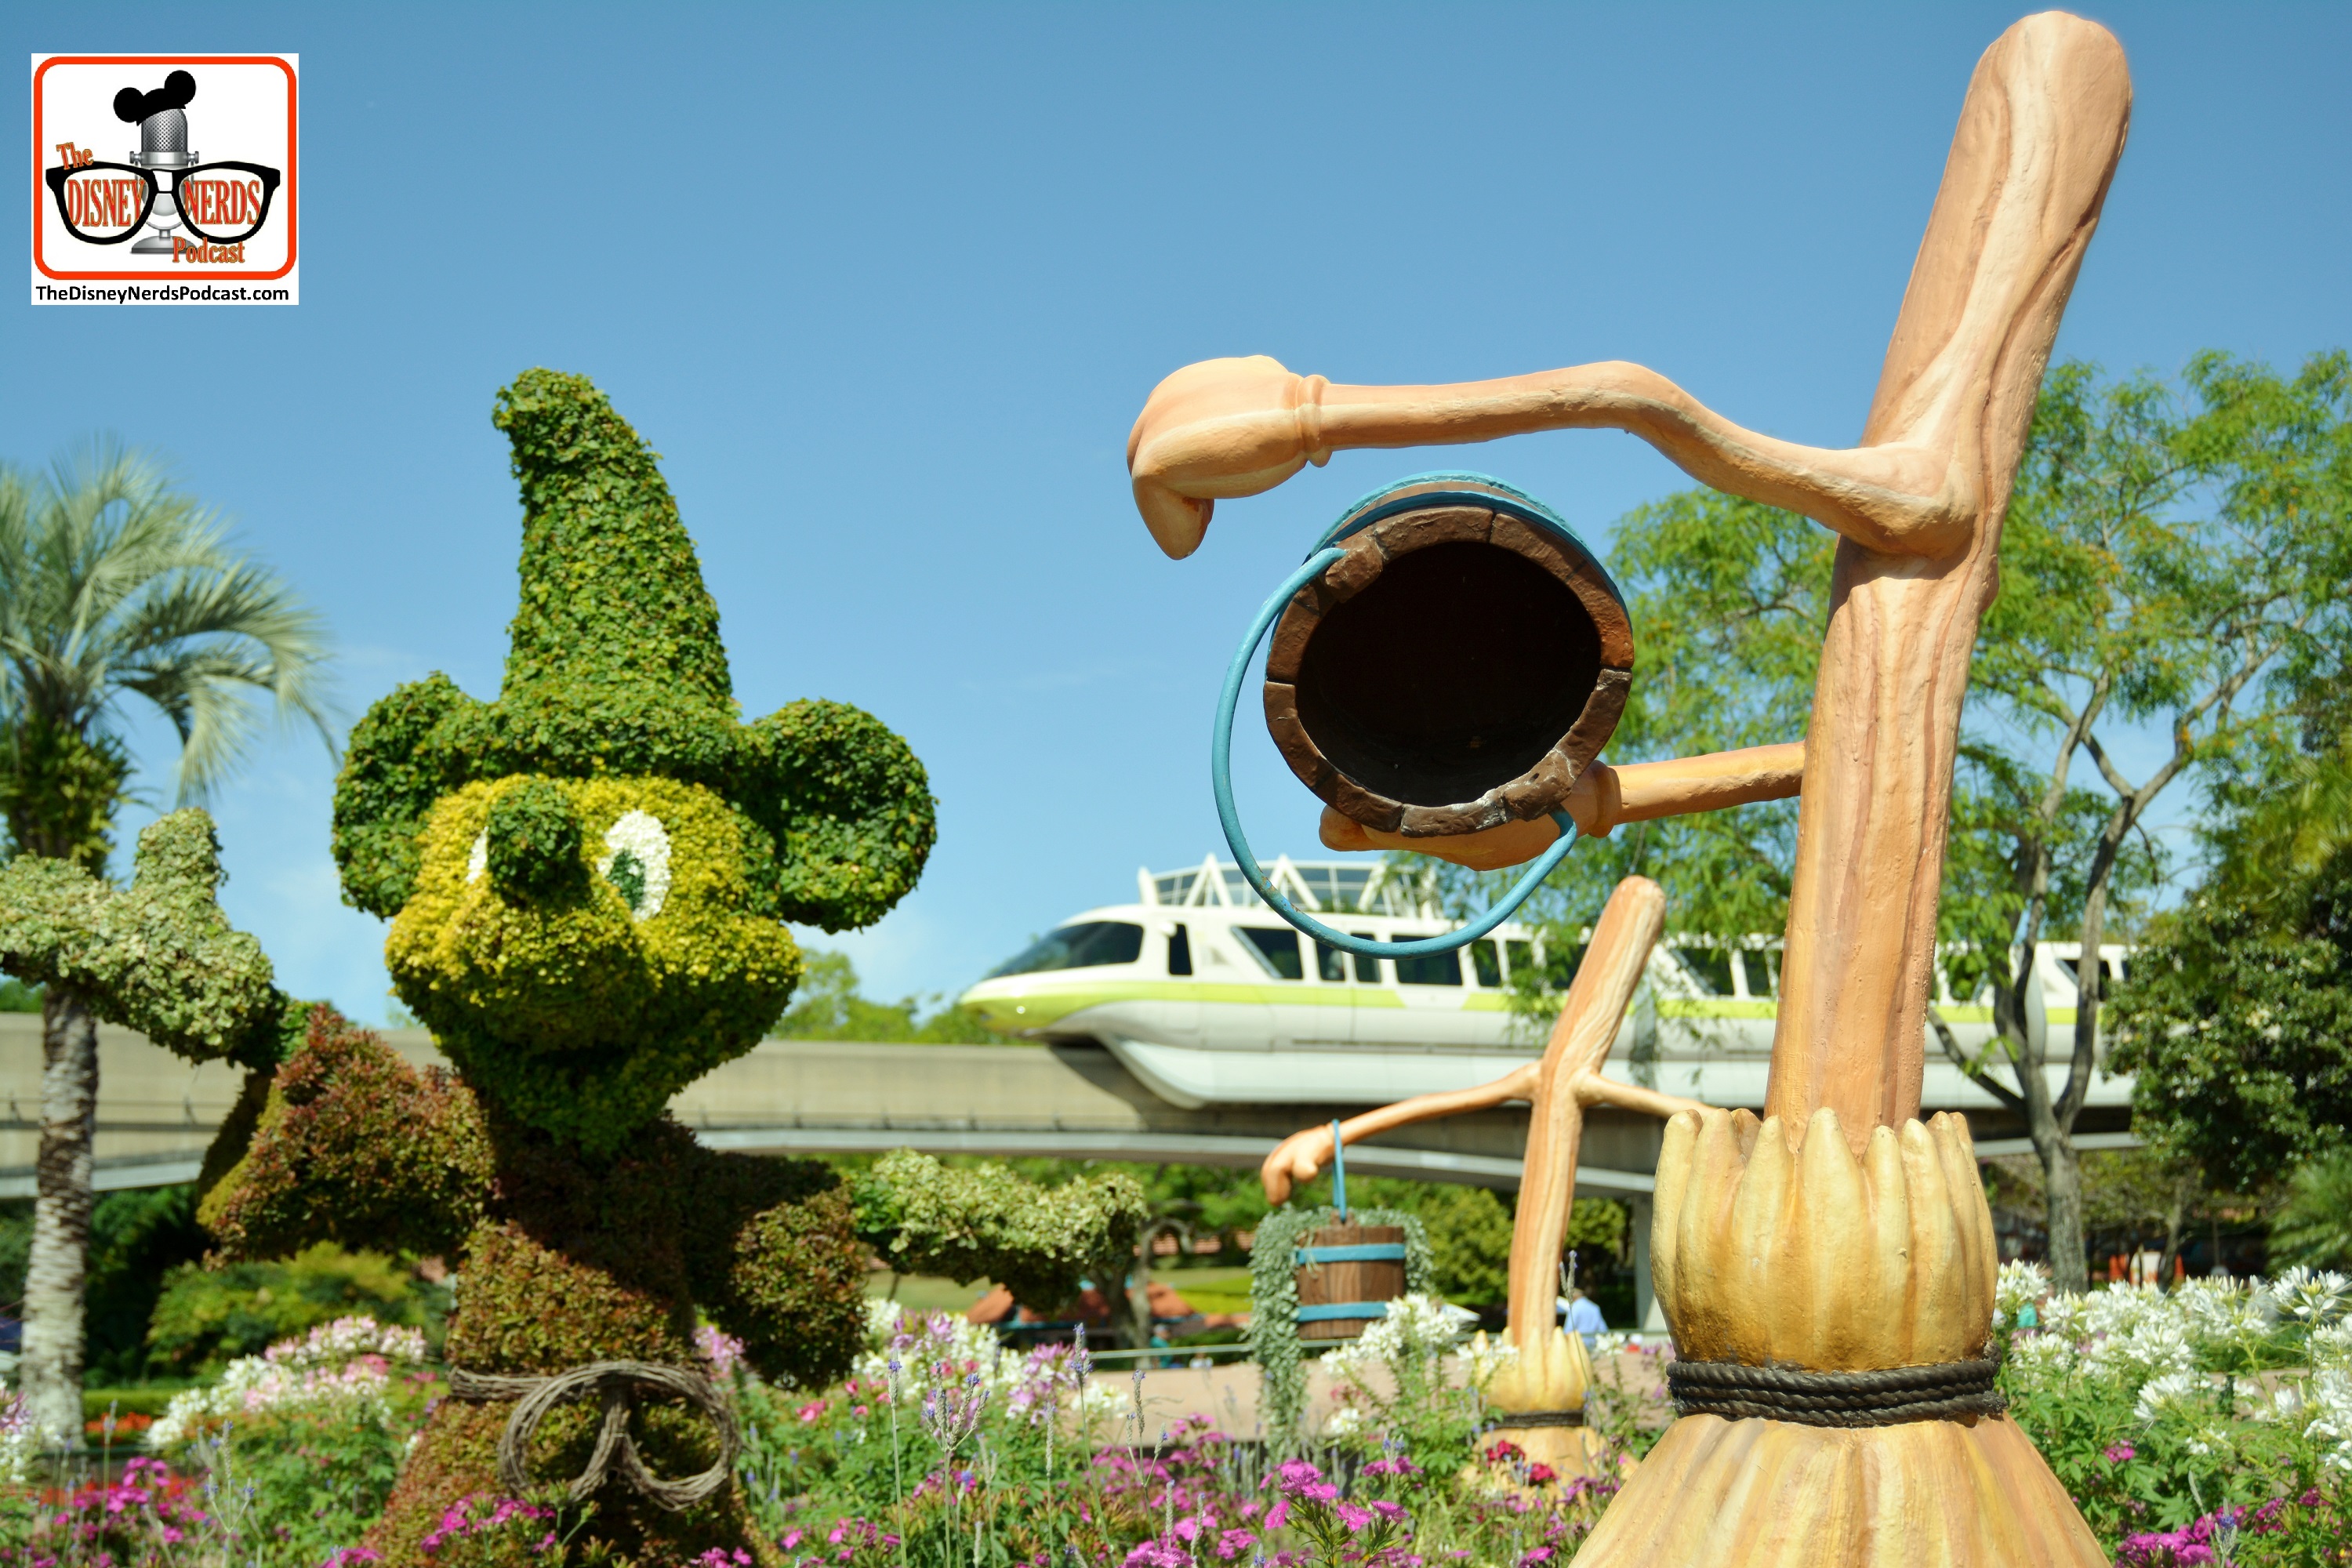 DNP April 2016 Photo Report: Epcot Flower and Garden Festival. Fantasia Display in Future World West with monorail